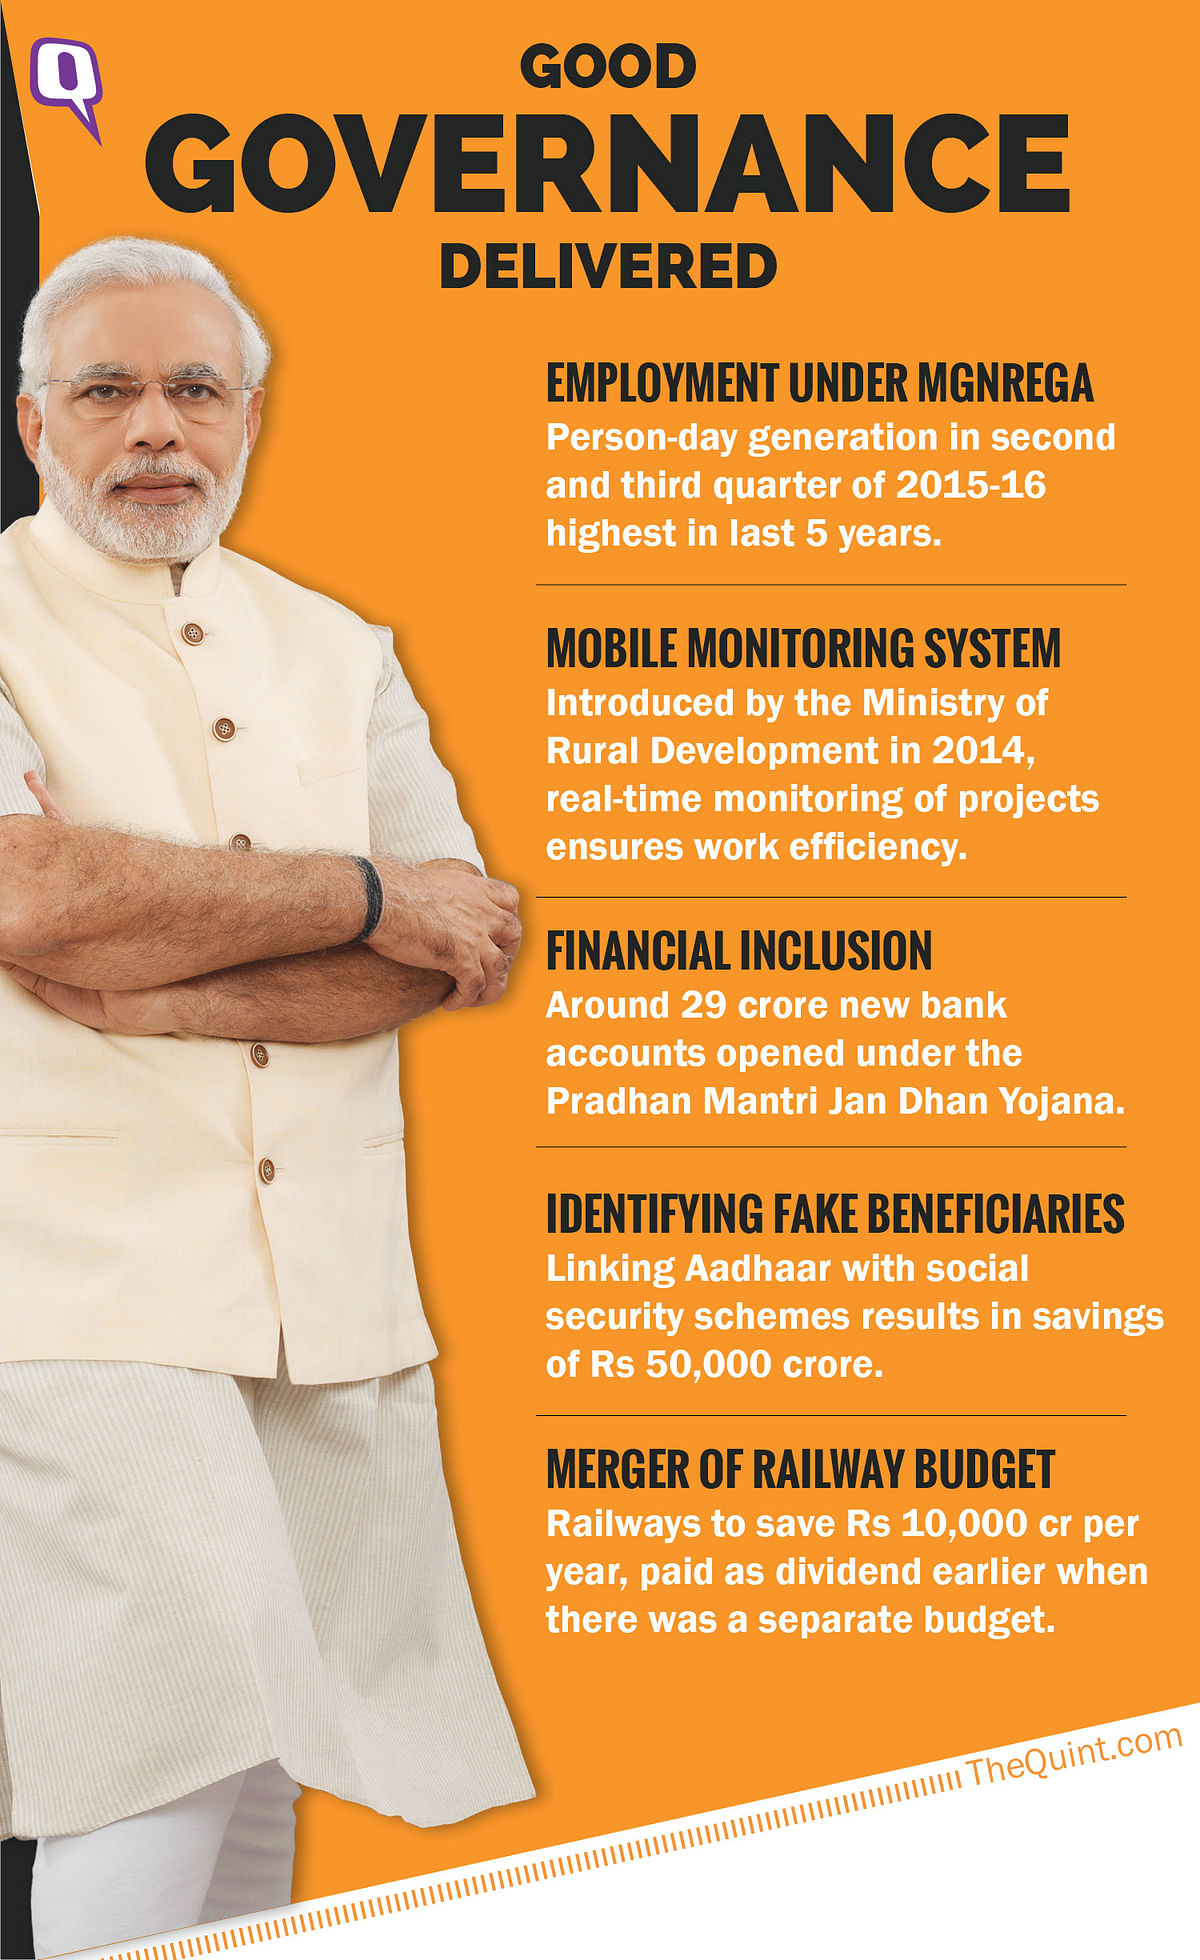 

Through a slew of schemes initiated in 2014, PM Modi has delivered on the front of governance.